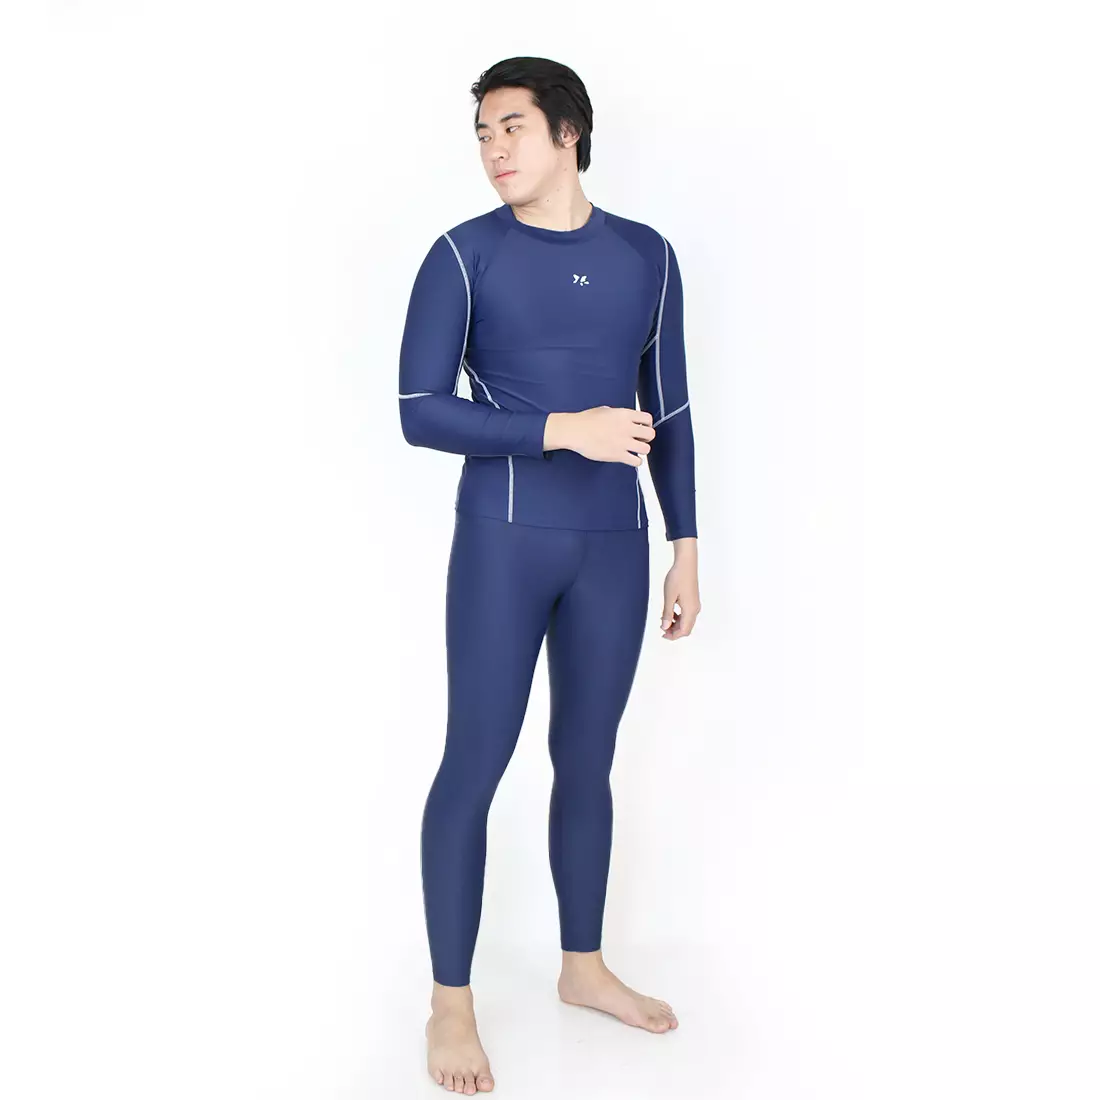 FITEXTREME Mens MAXHEAT Compression Performance Long Johns Thermal